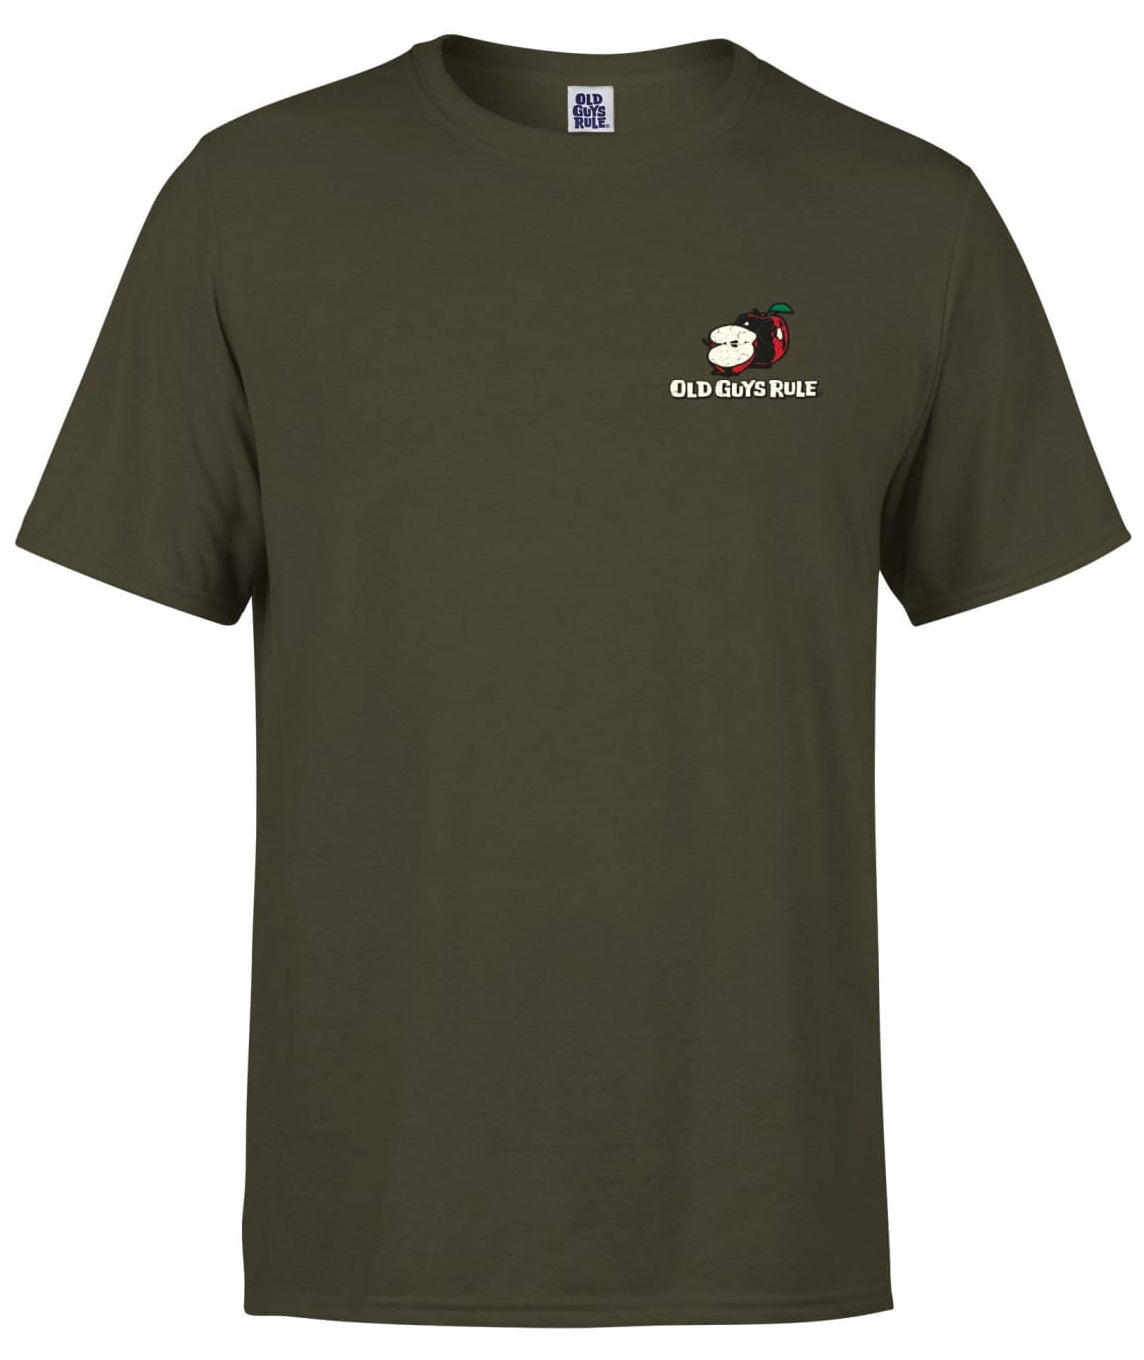 Men's Old Guys Rule short sleeve Five a Day III cider themed printed t-shirt in Olive Green. 